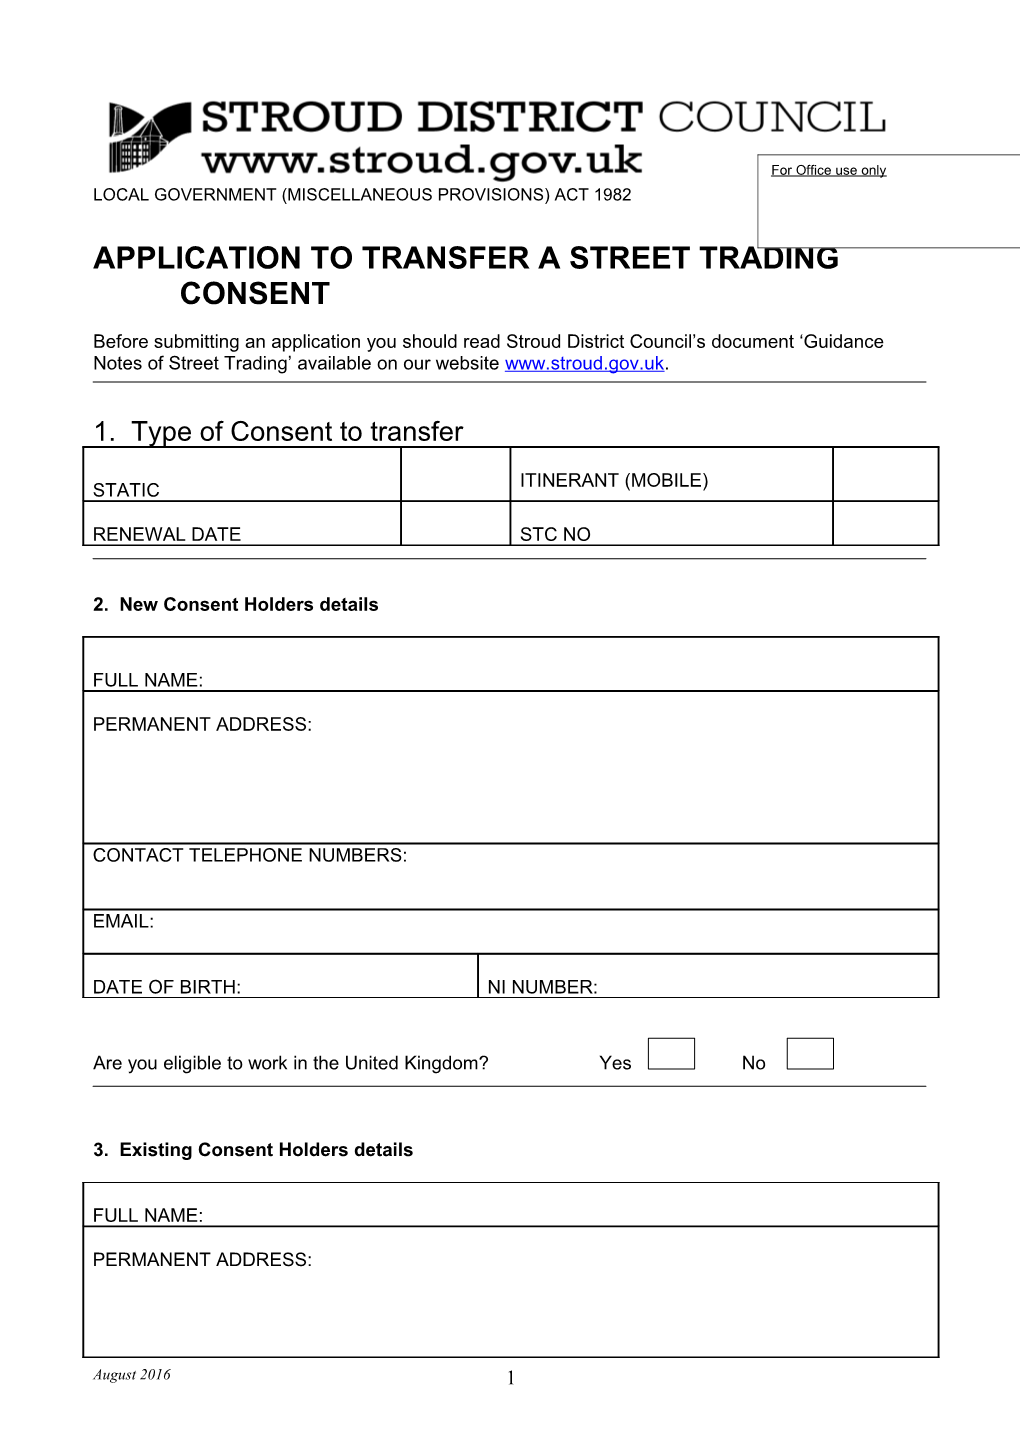 Application to Transfer a Street Trading Consent